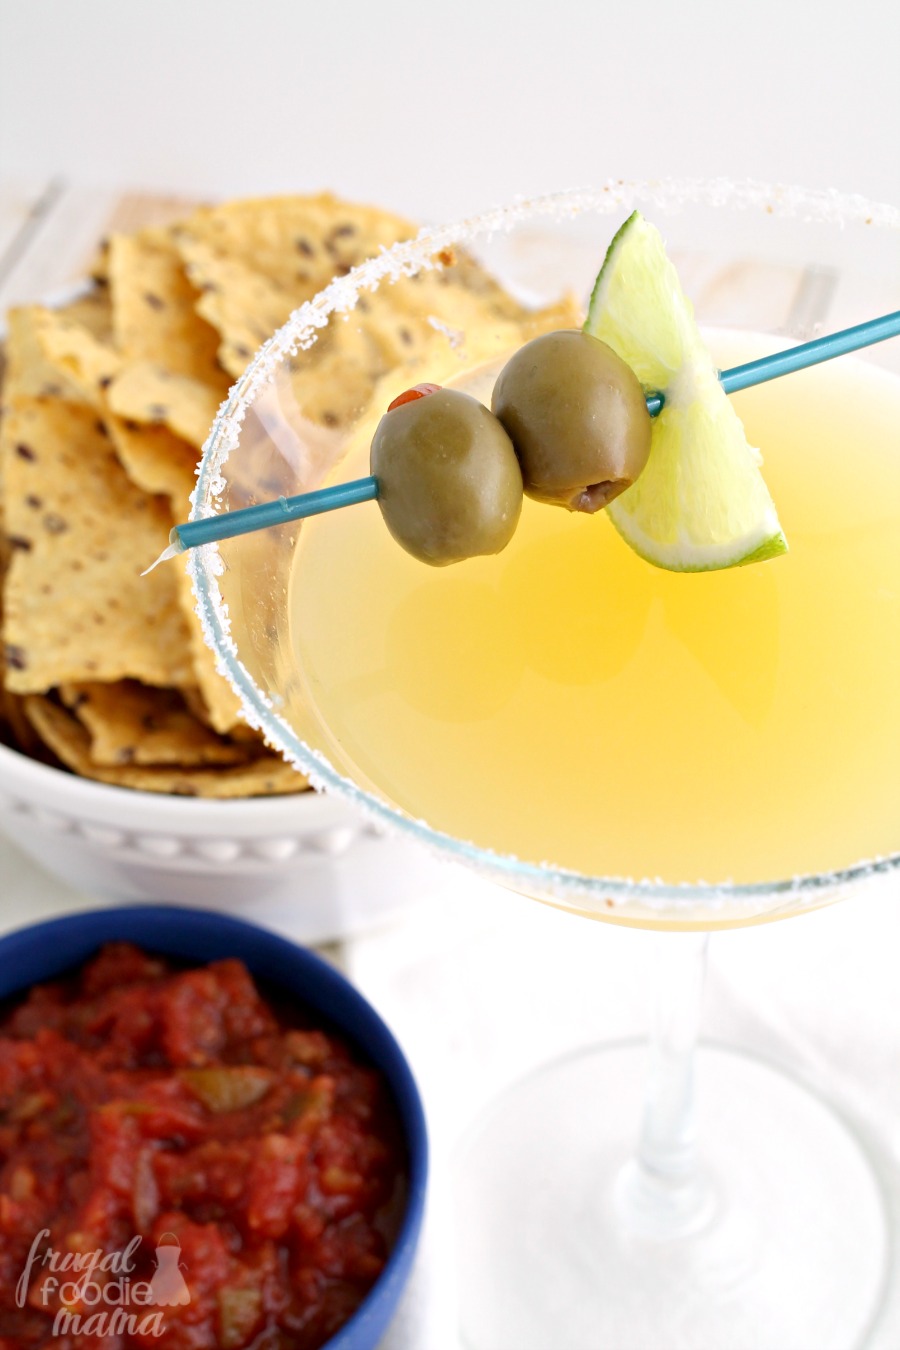 Frugal Foodie Mama: The Mexican Martini